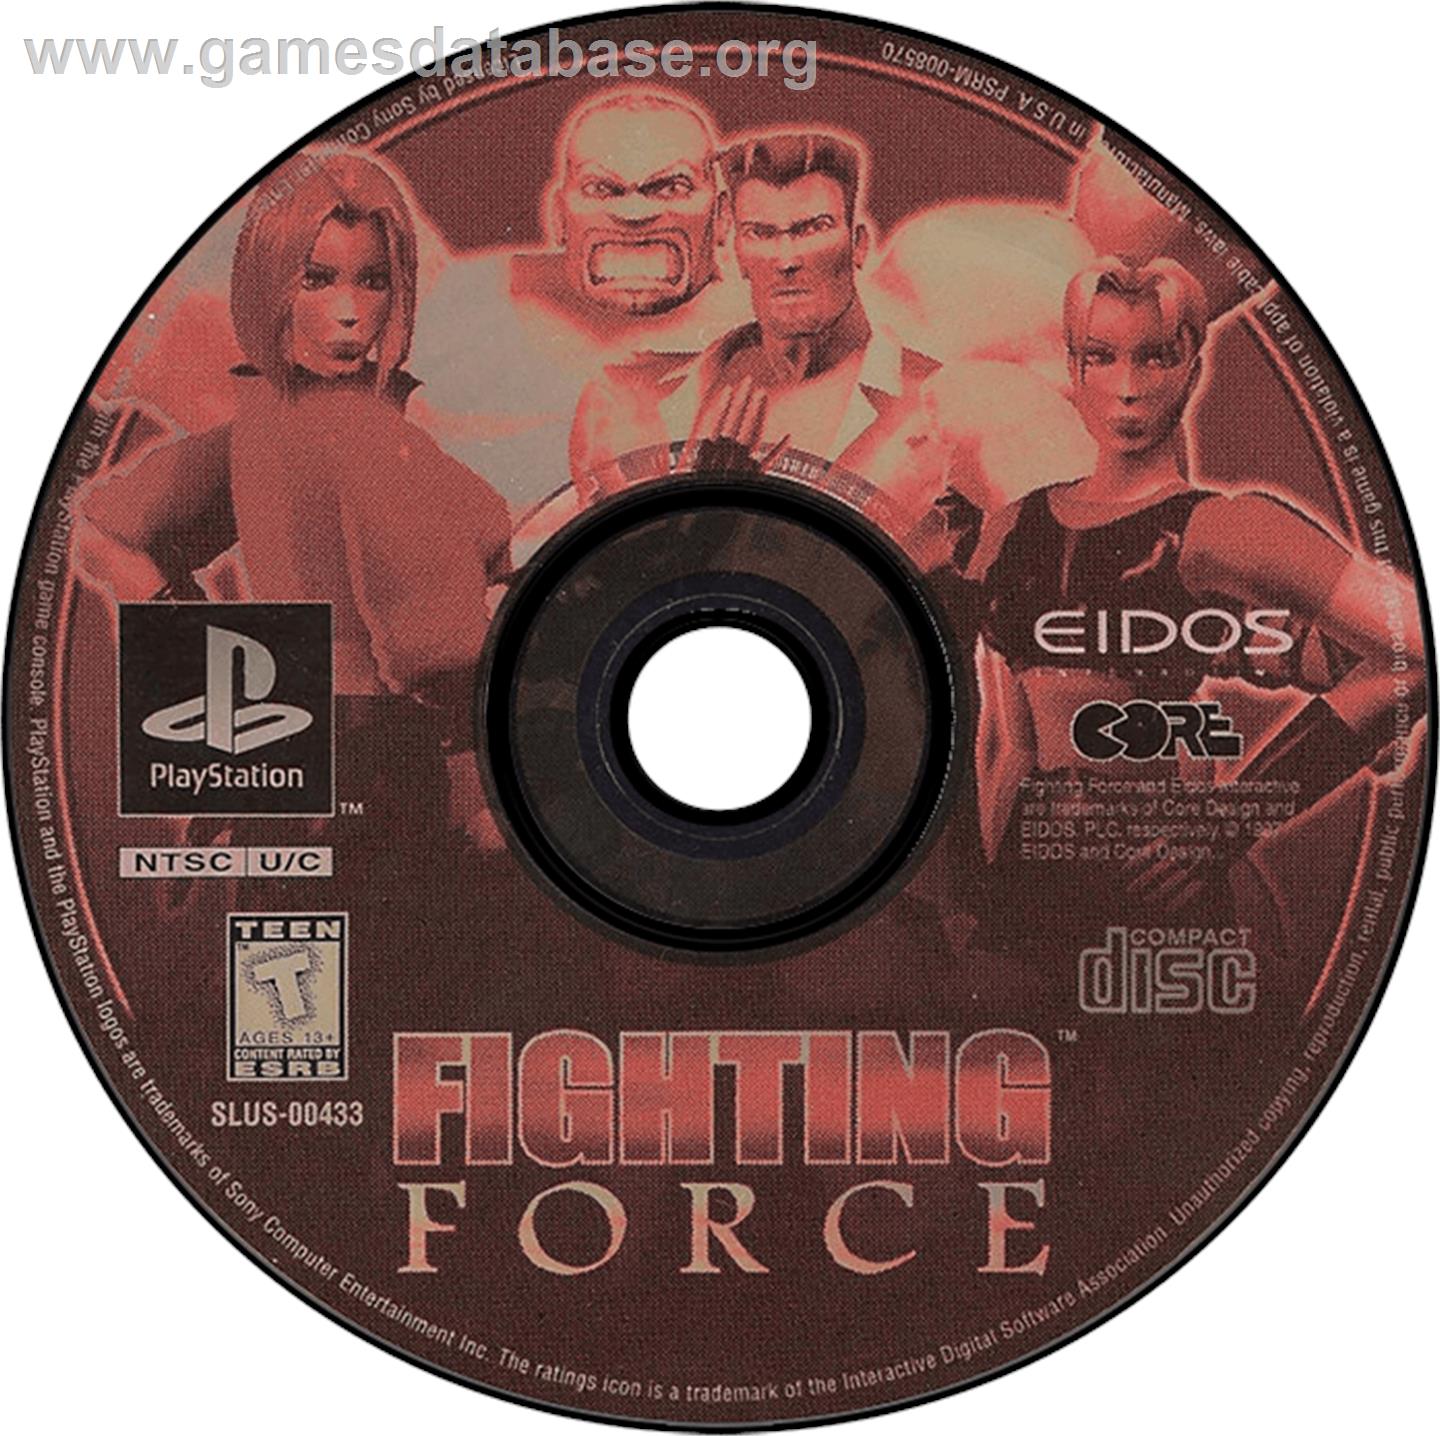 Fighting Force - Sony Playstation - Artwork - Disc